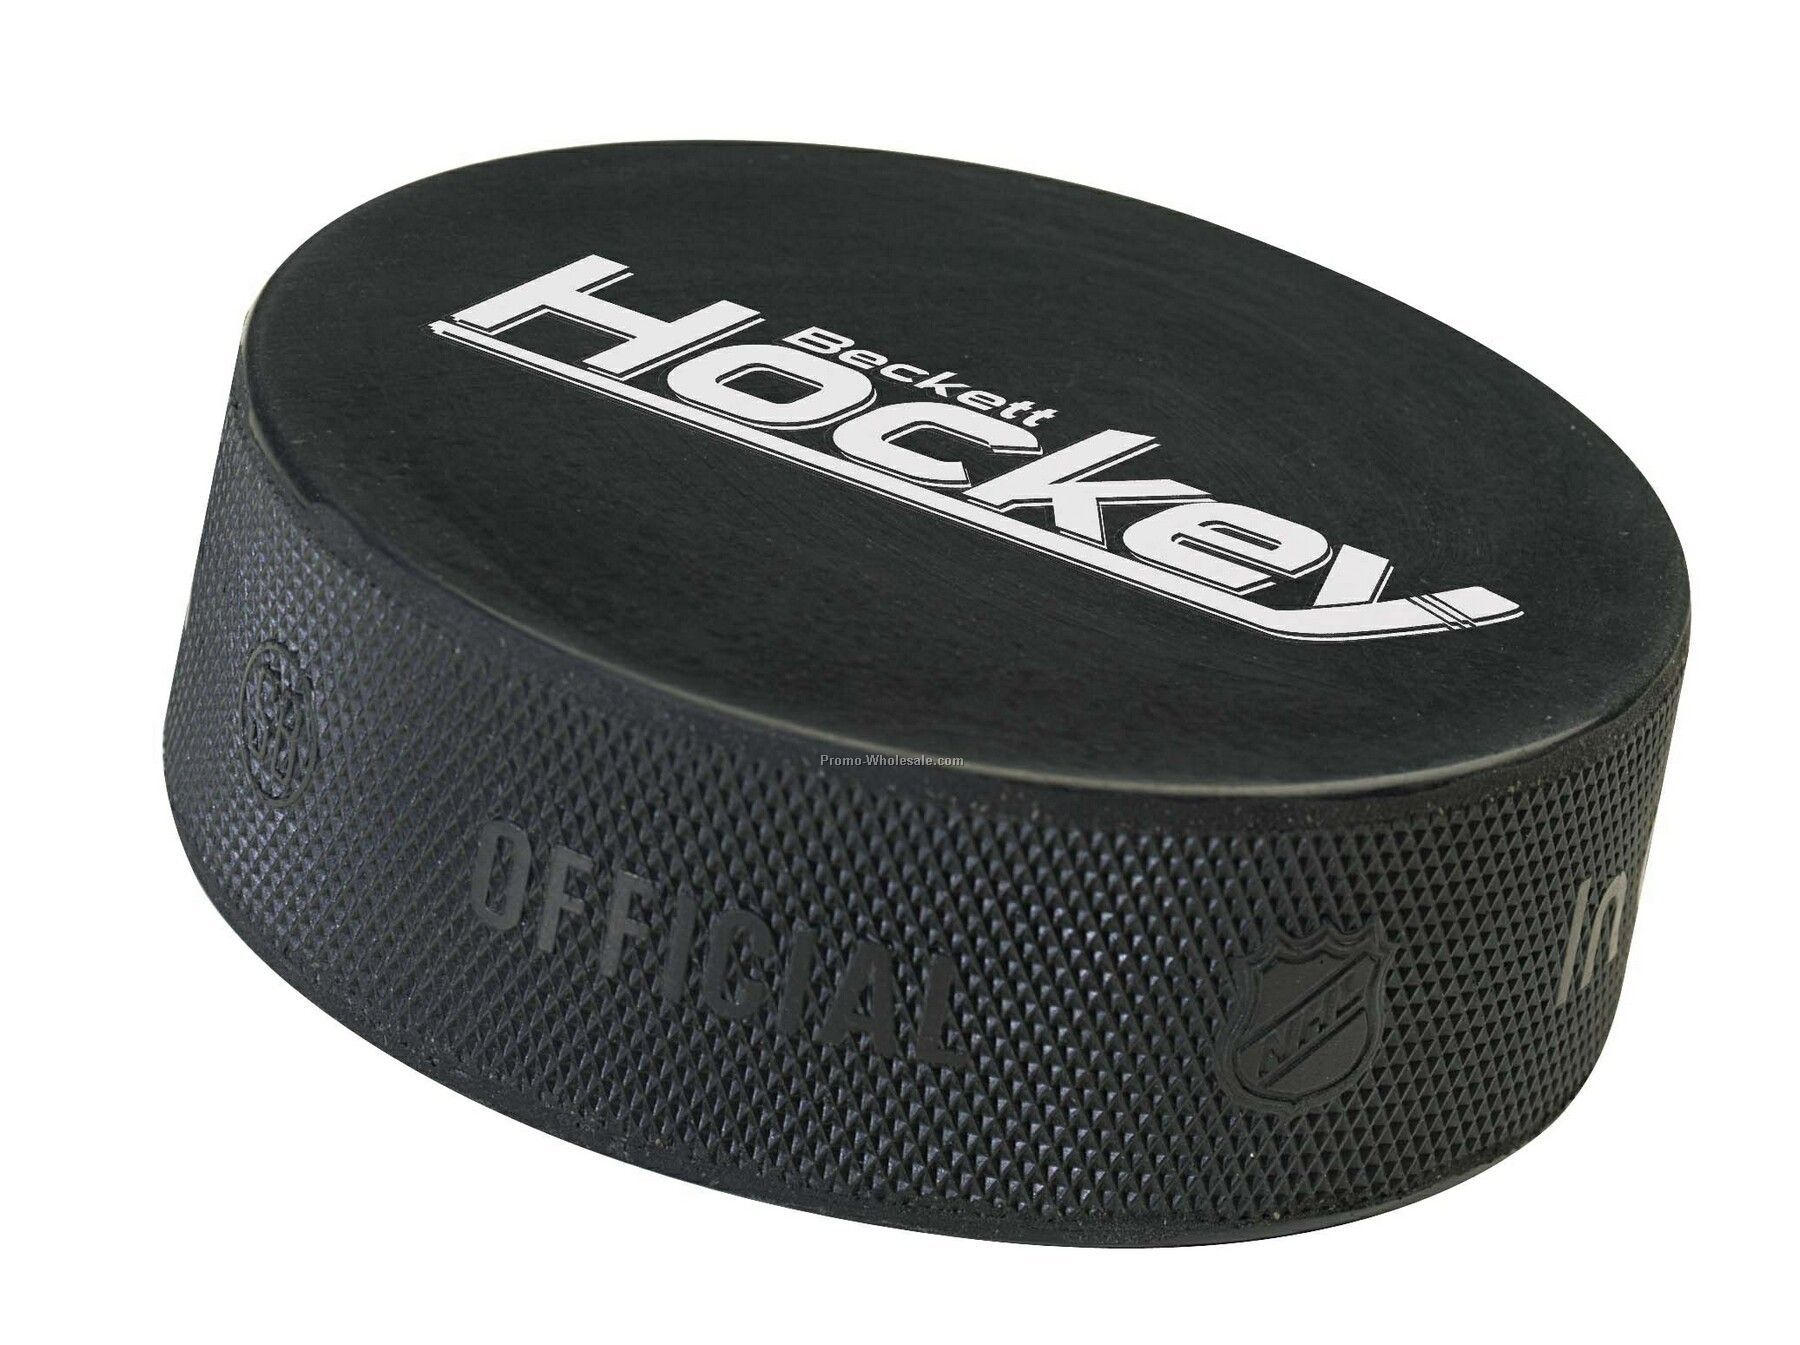 Action Line Official Nhl Hockey Puck